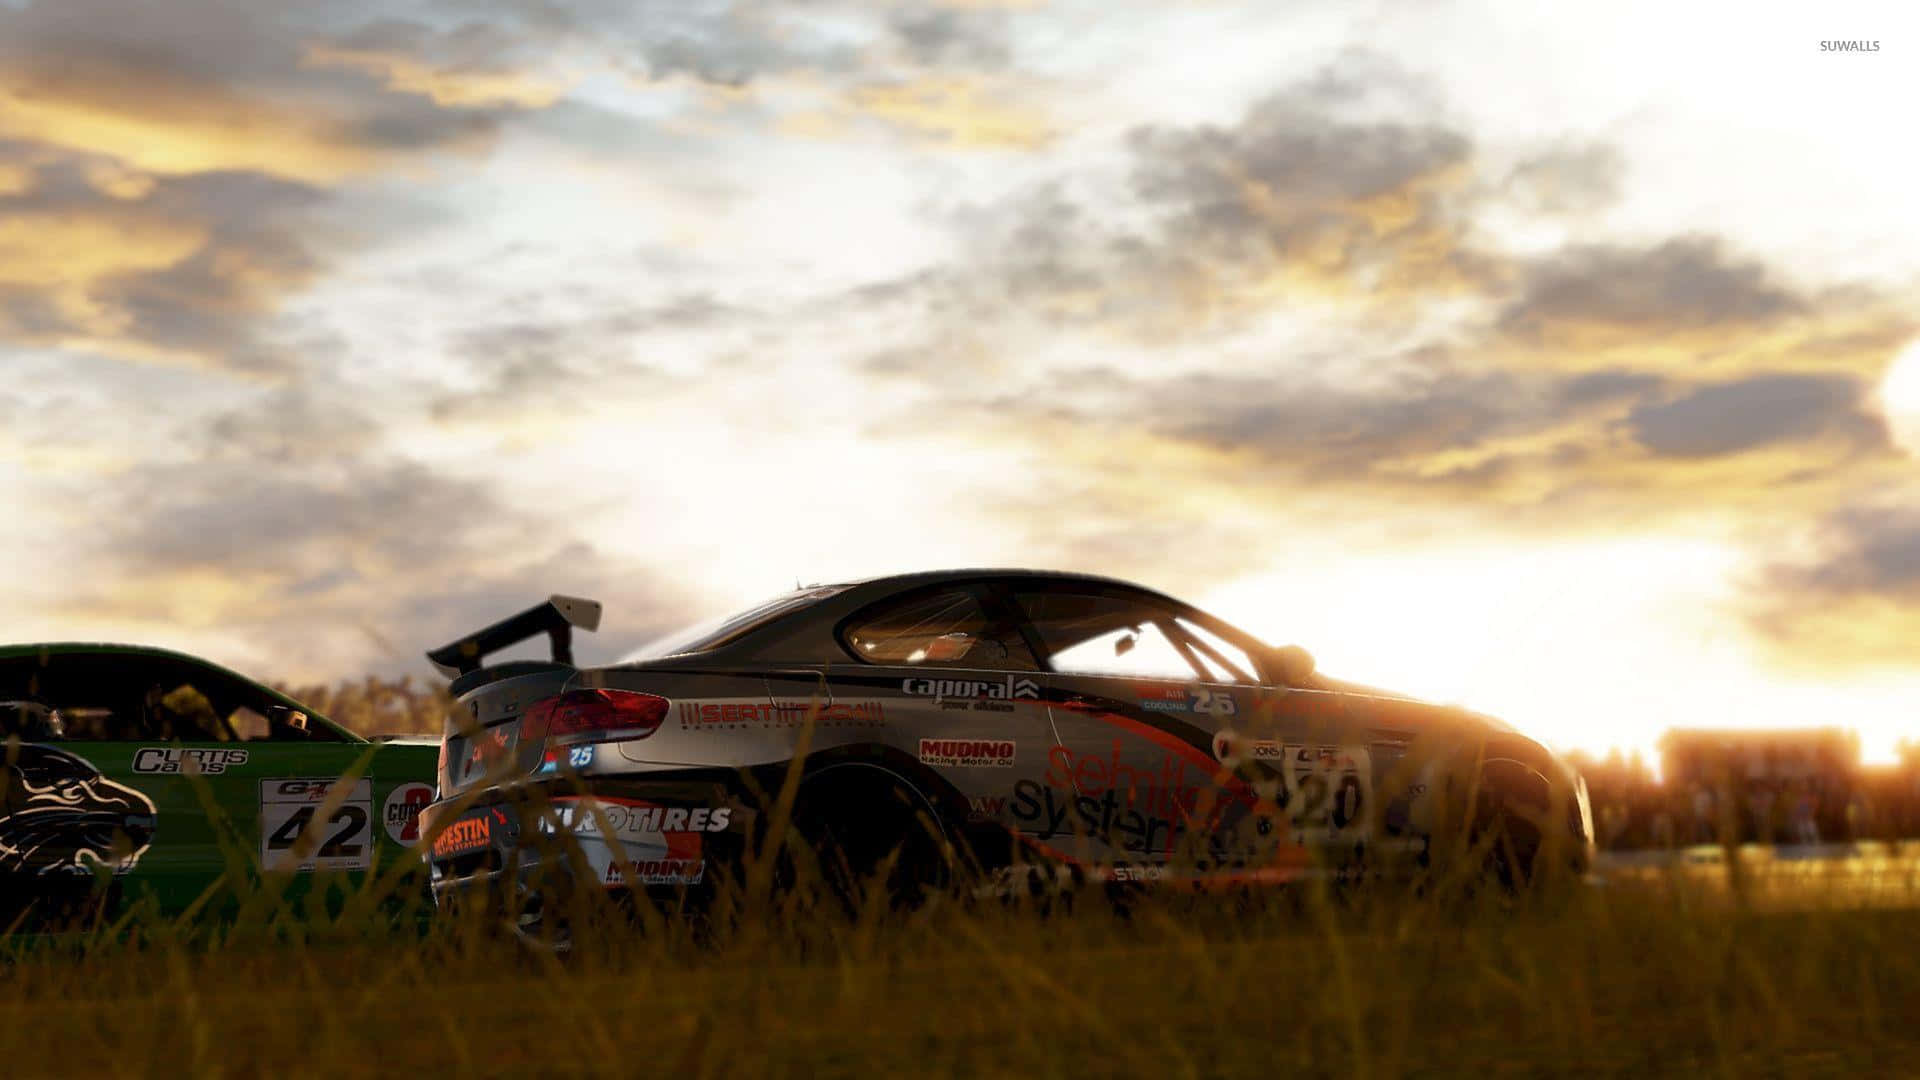 A Screenshot Of Two Cars In The Grass